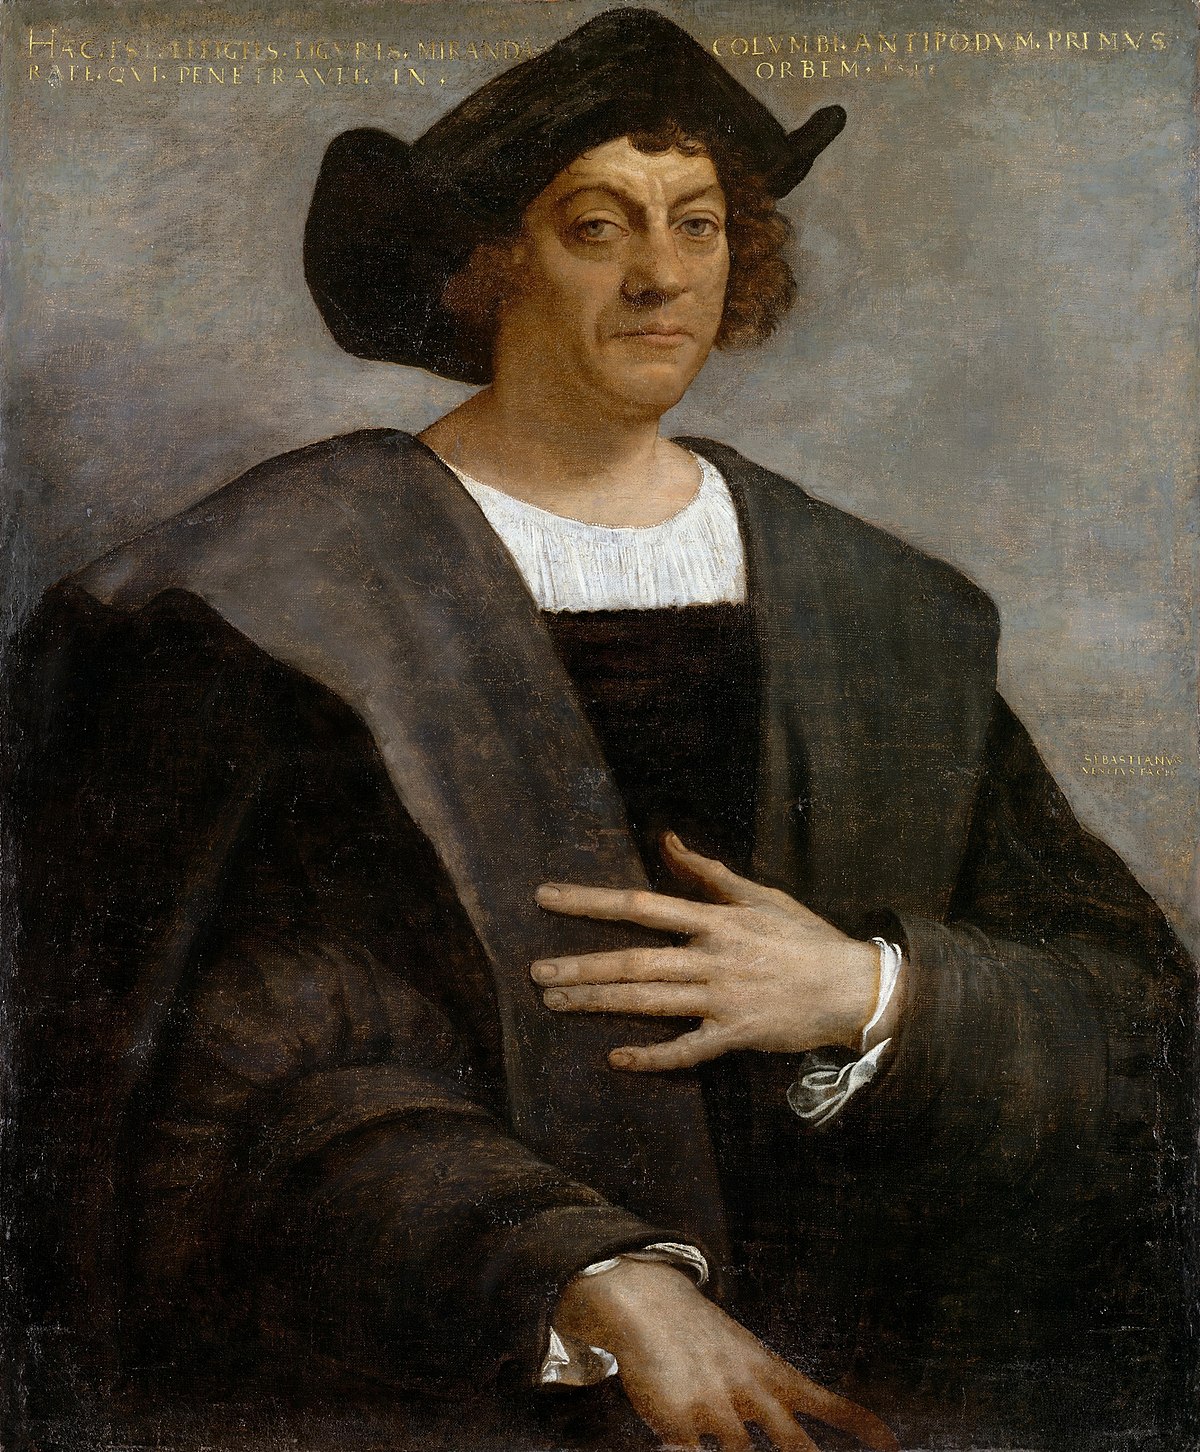 1200px-Portrait_of_a_Man,_Said_to_be_Christopher_Columbus